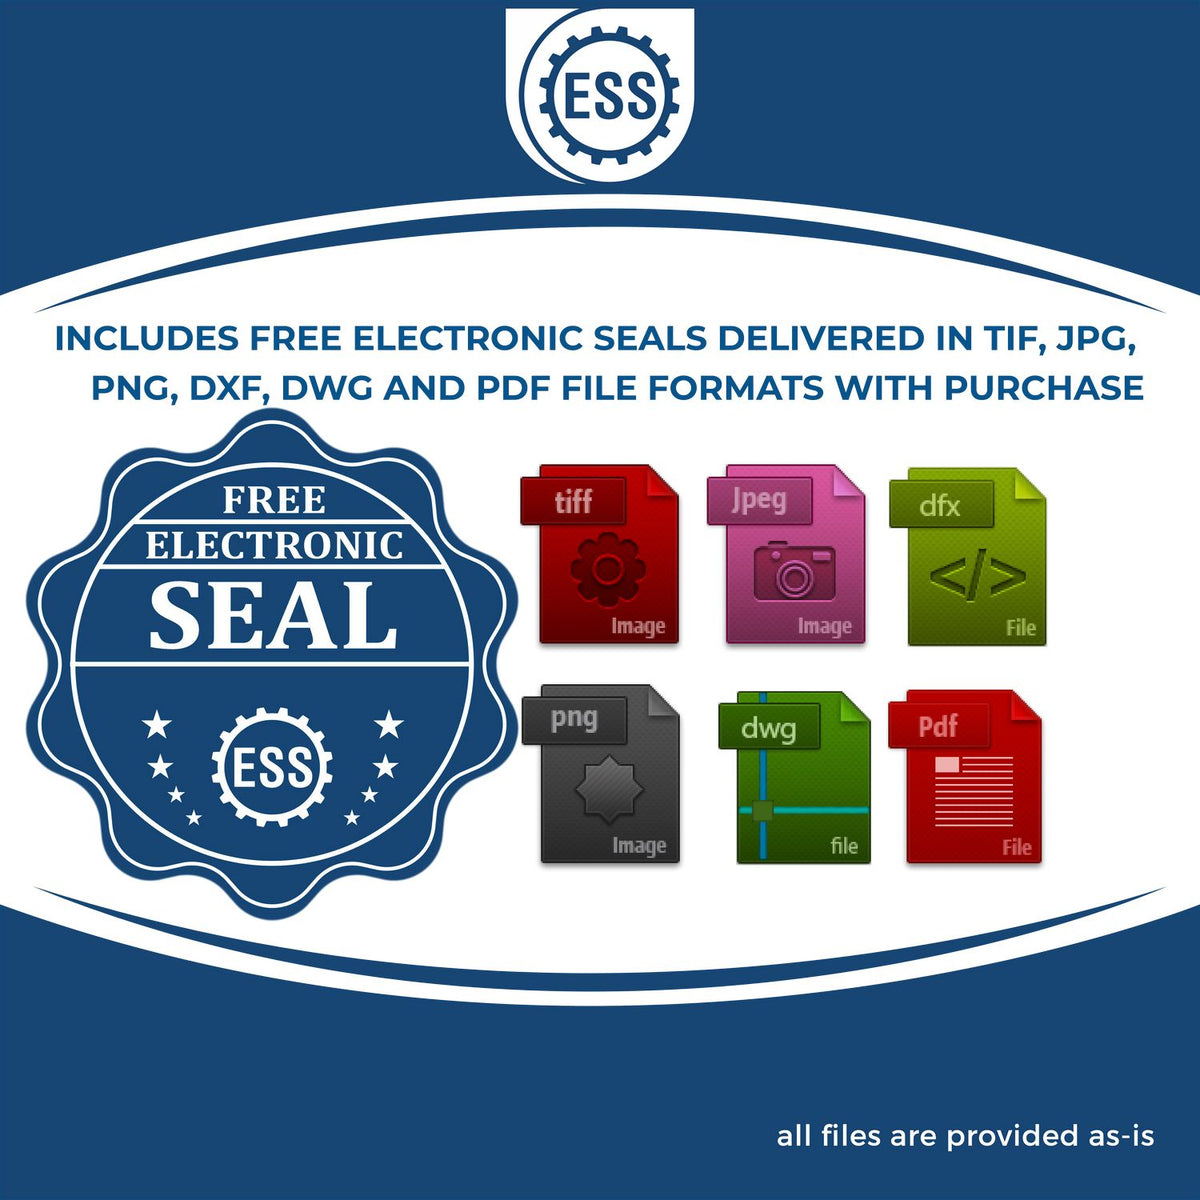 An infographic for the free electronic seal for the Self-Inking Florida Geologist Stamp illustrating the different file type icons such as DXF, DWG, TIF, JPG and PNG.